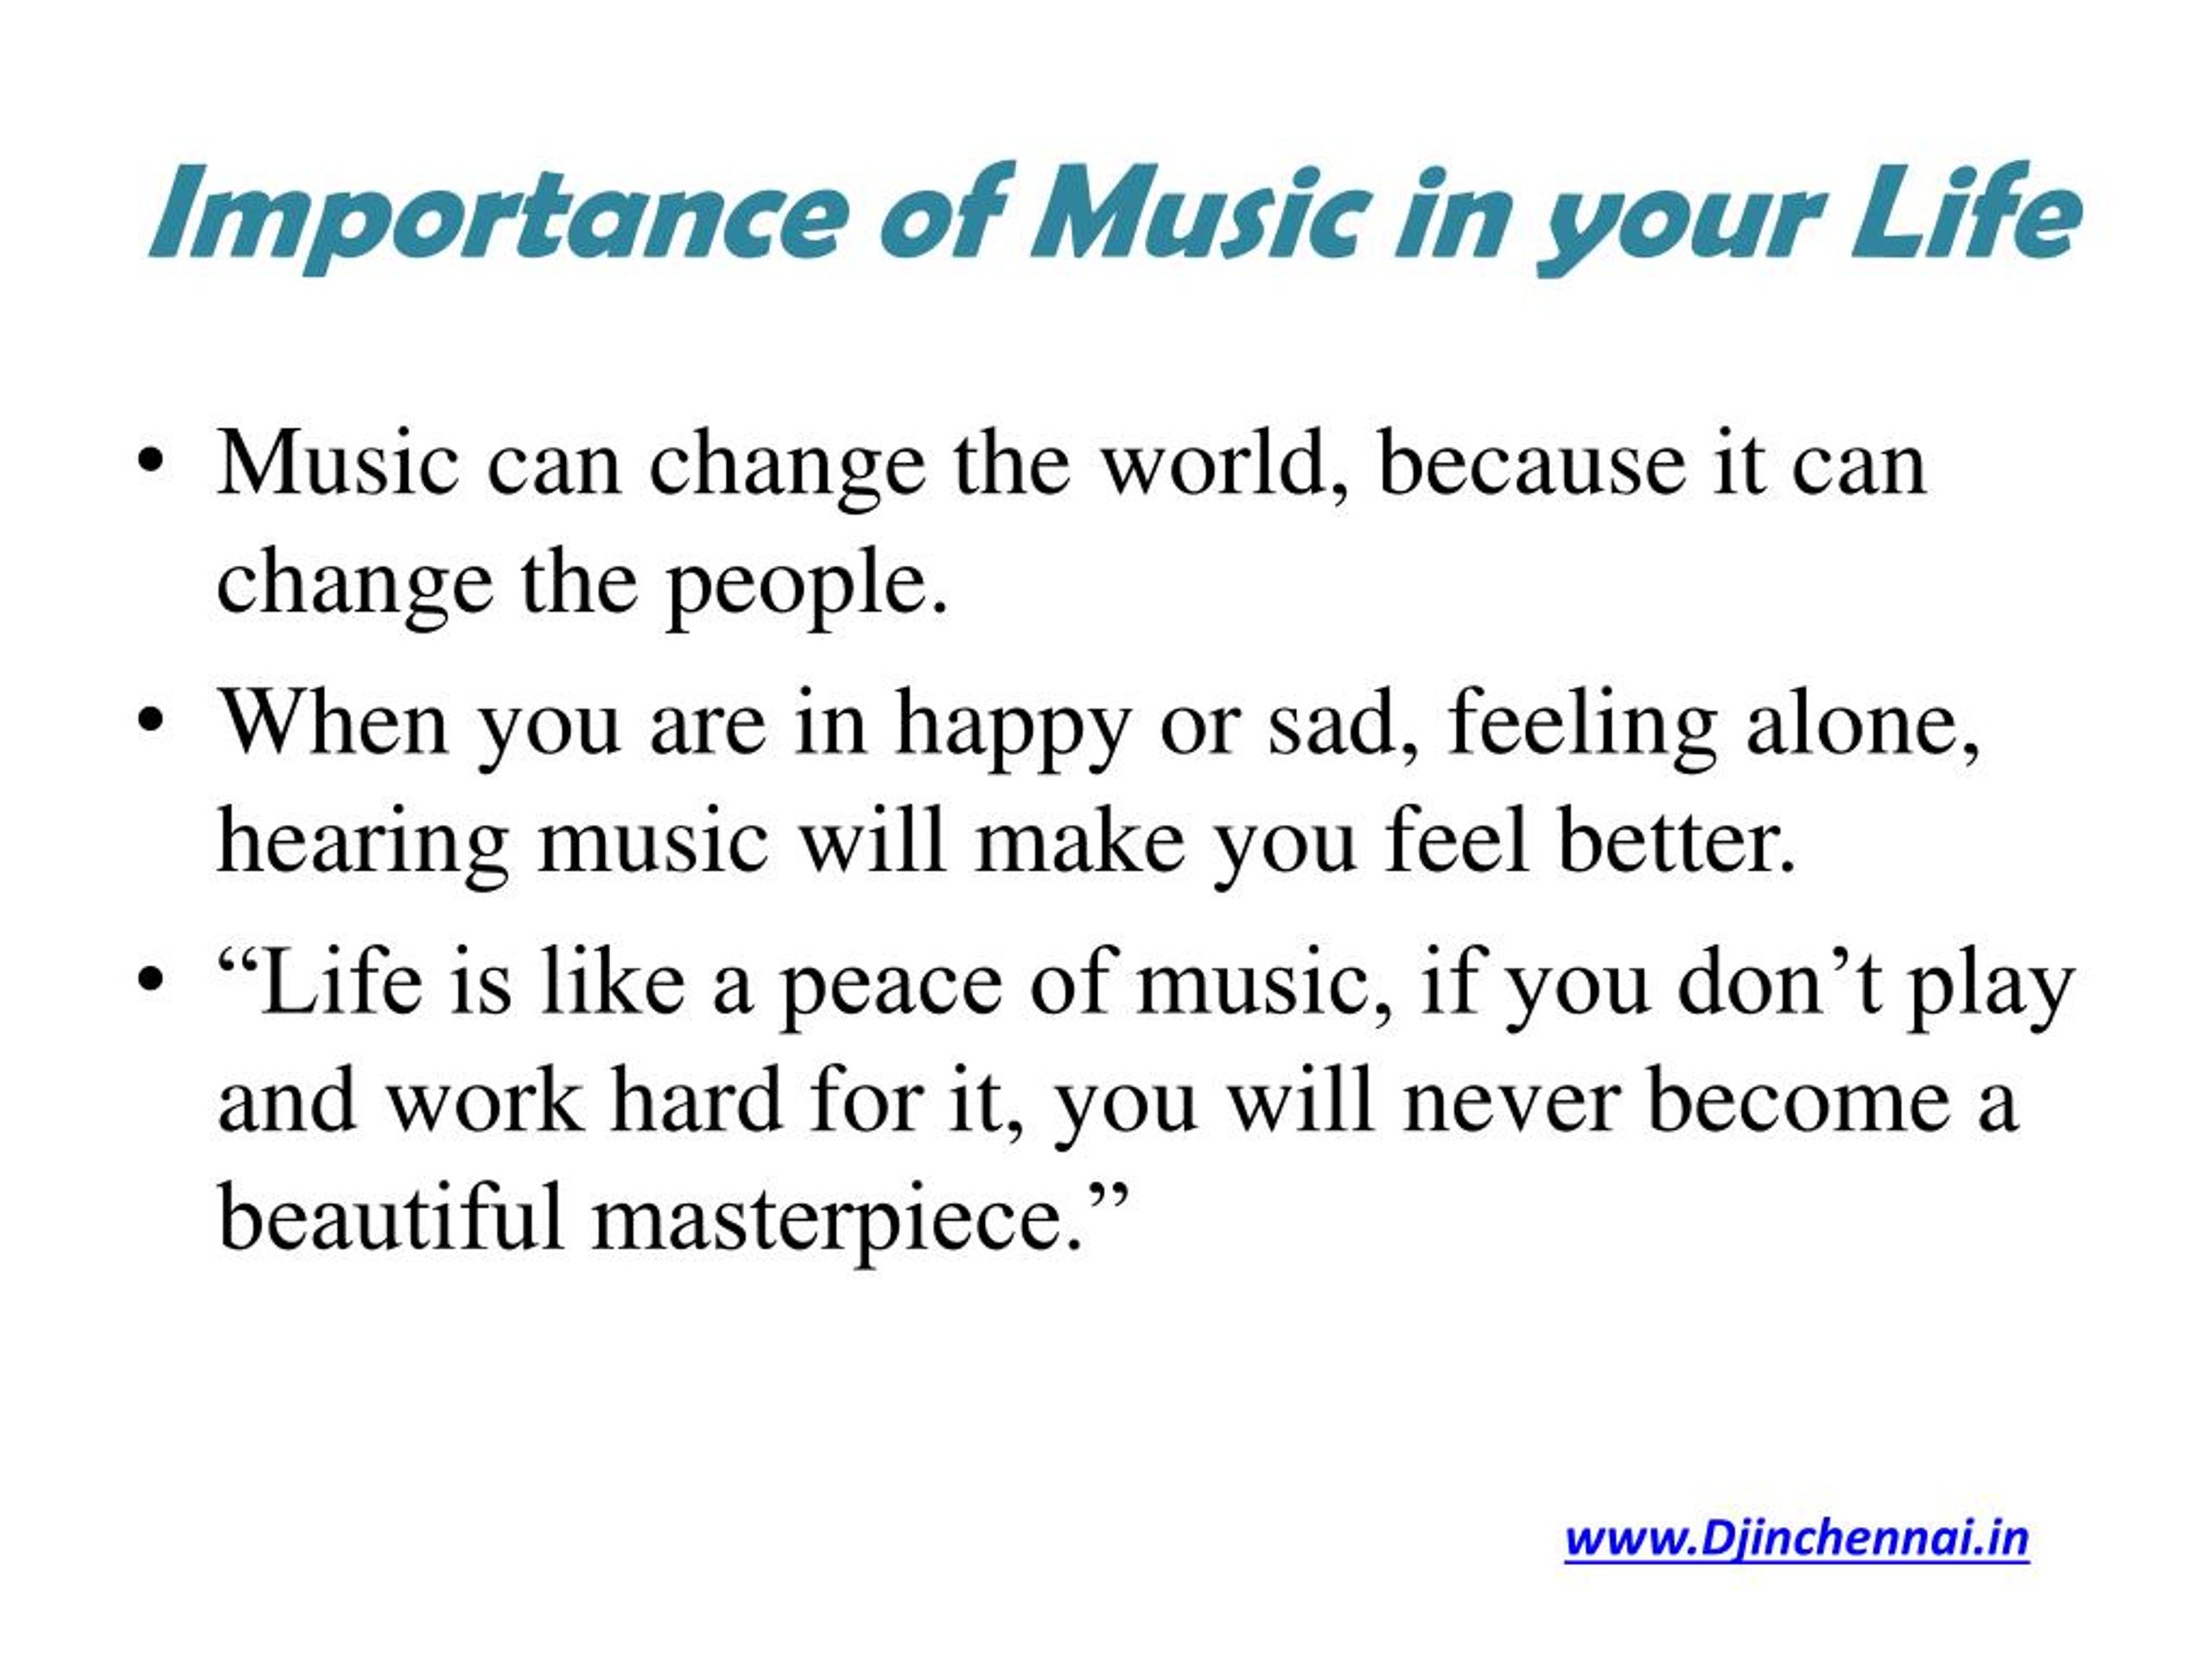 music in our life essay